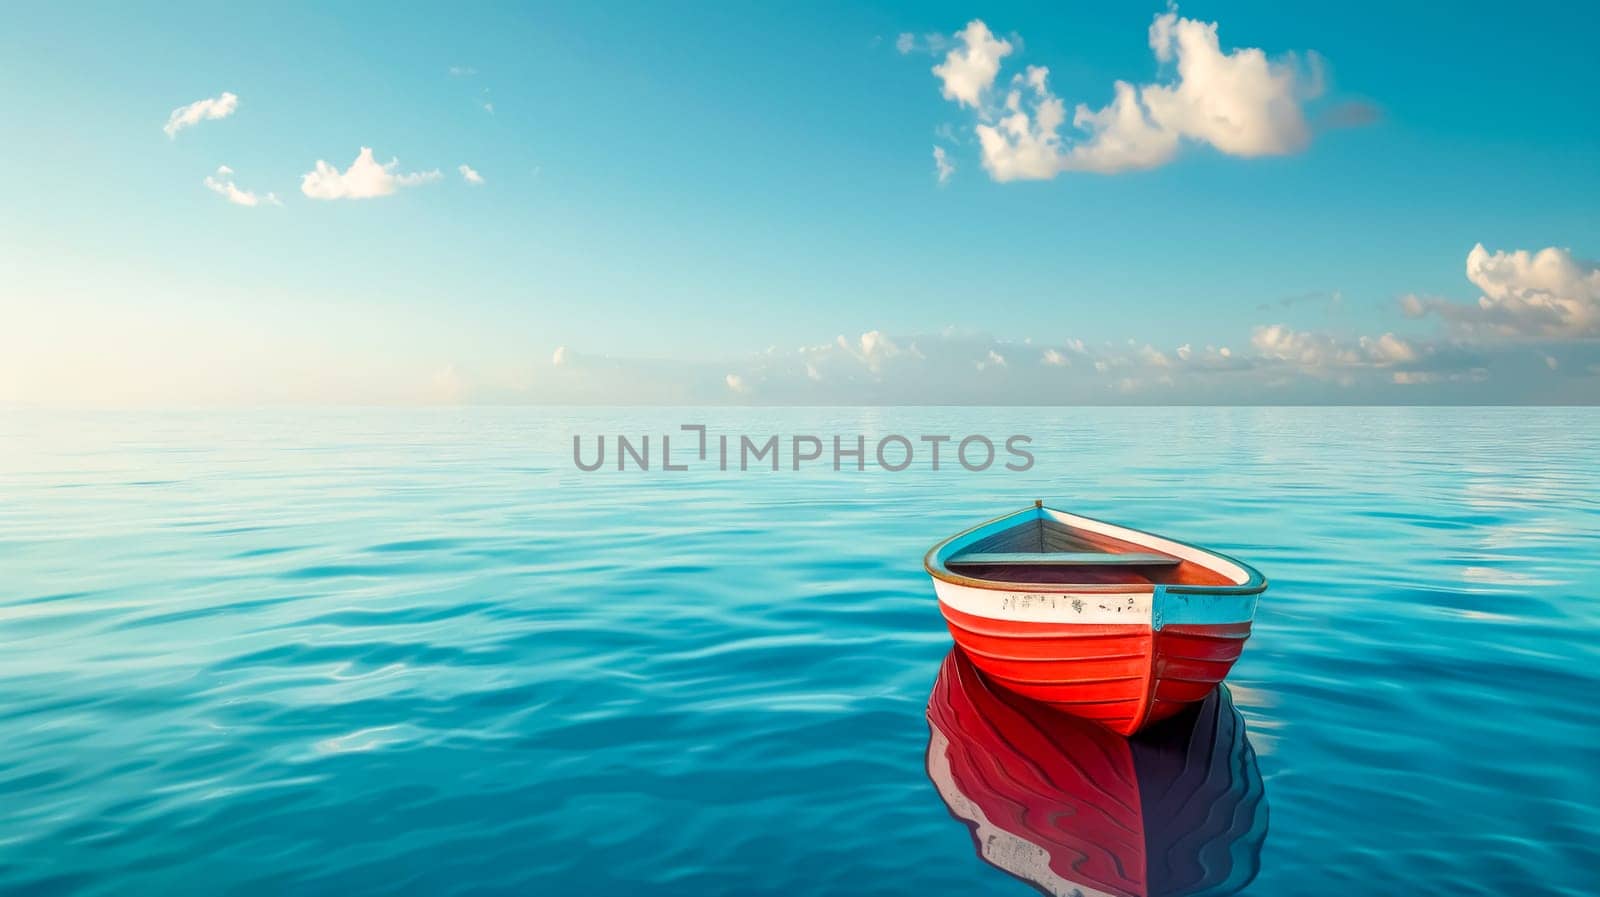 Tranquil image of a solitary red boat floating on a calm blue ocean under a clear sky